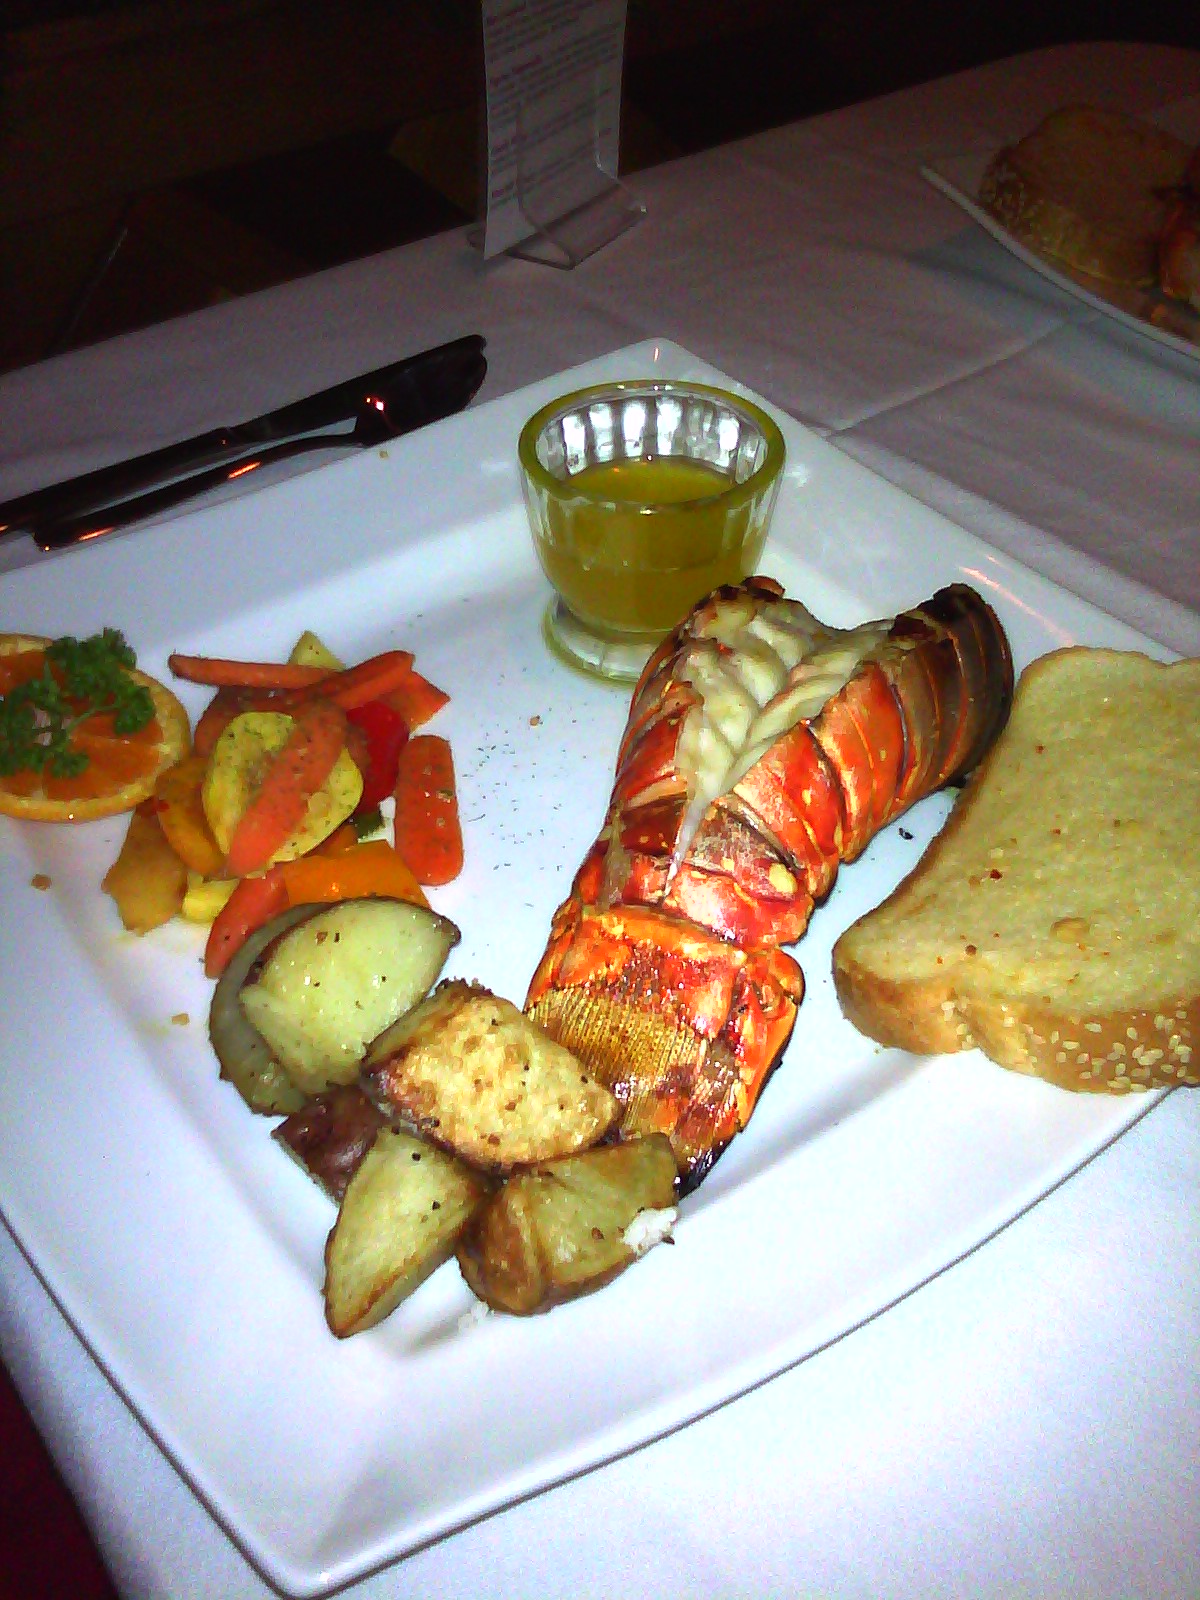 the lobster dish has many vegetables and side dishes